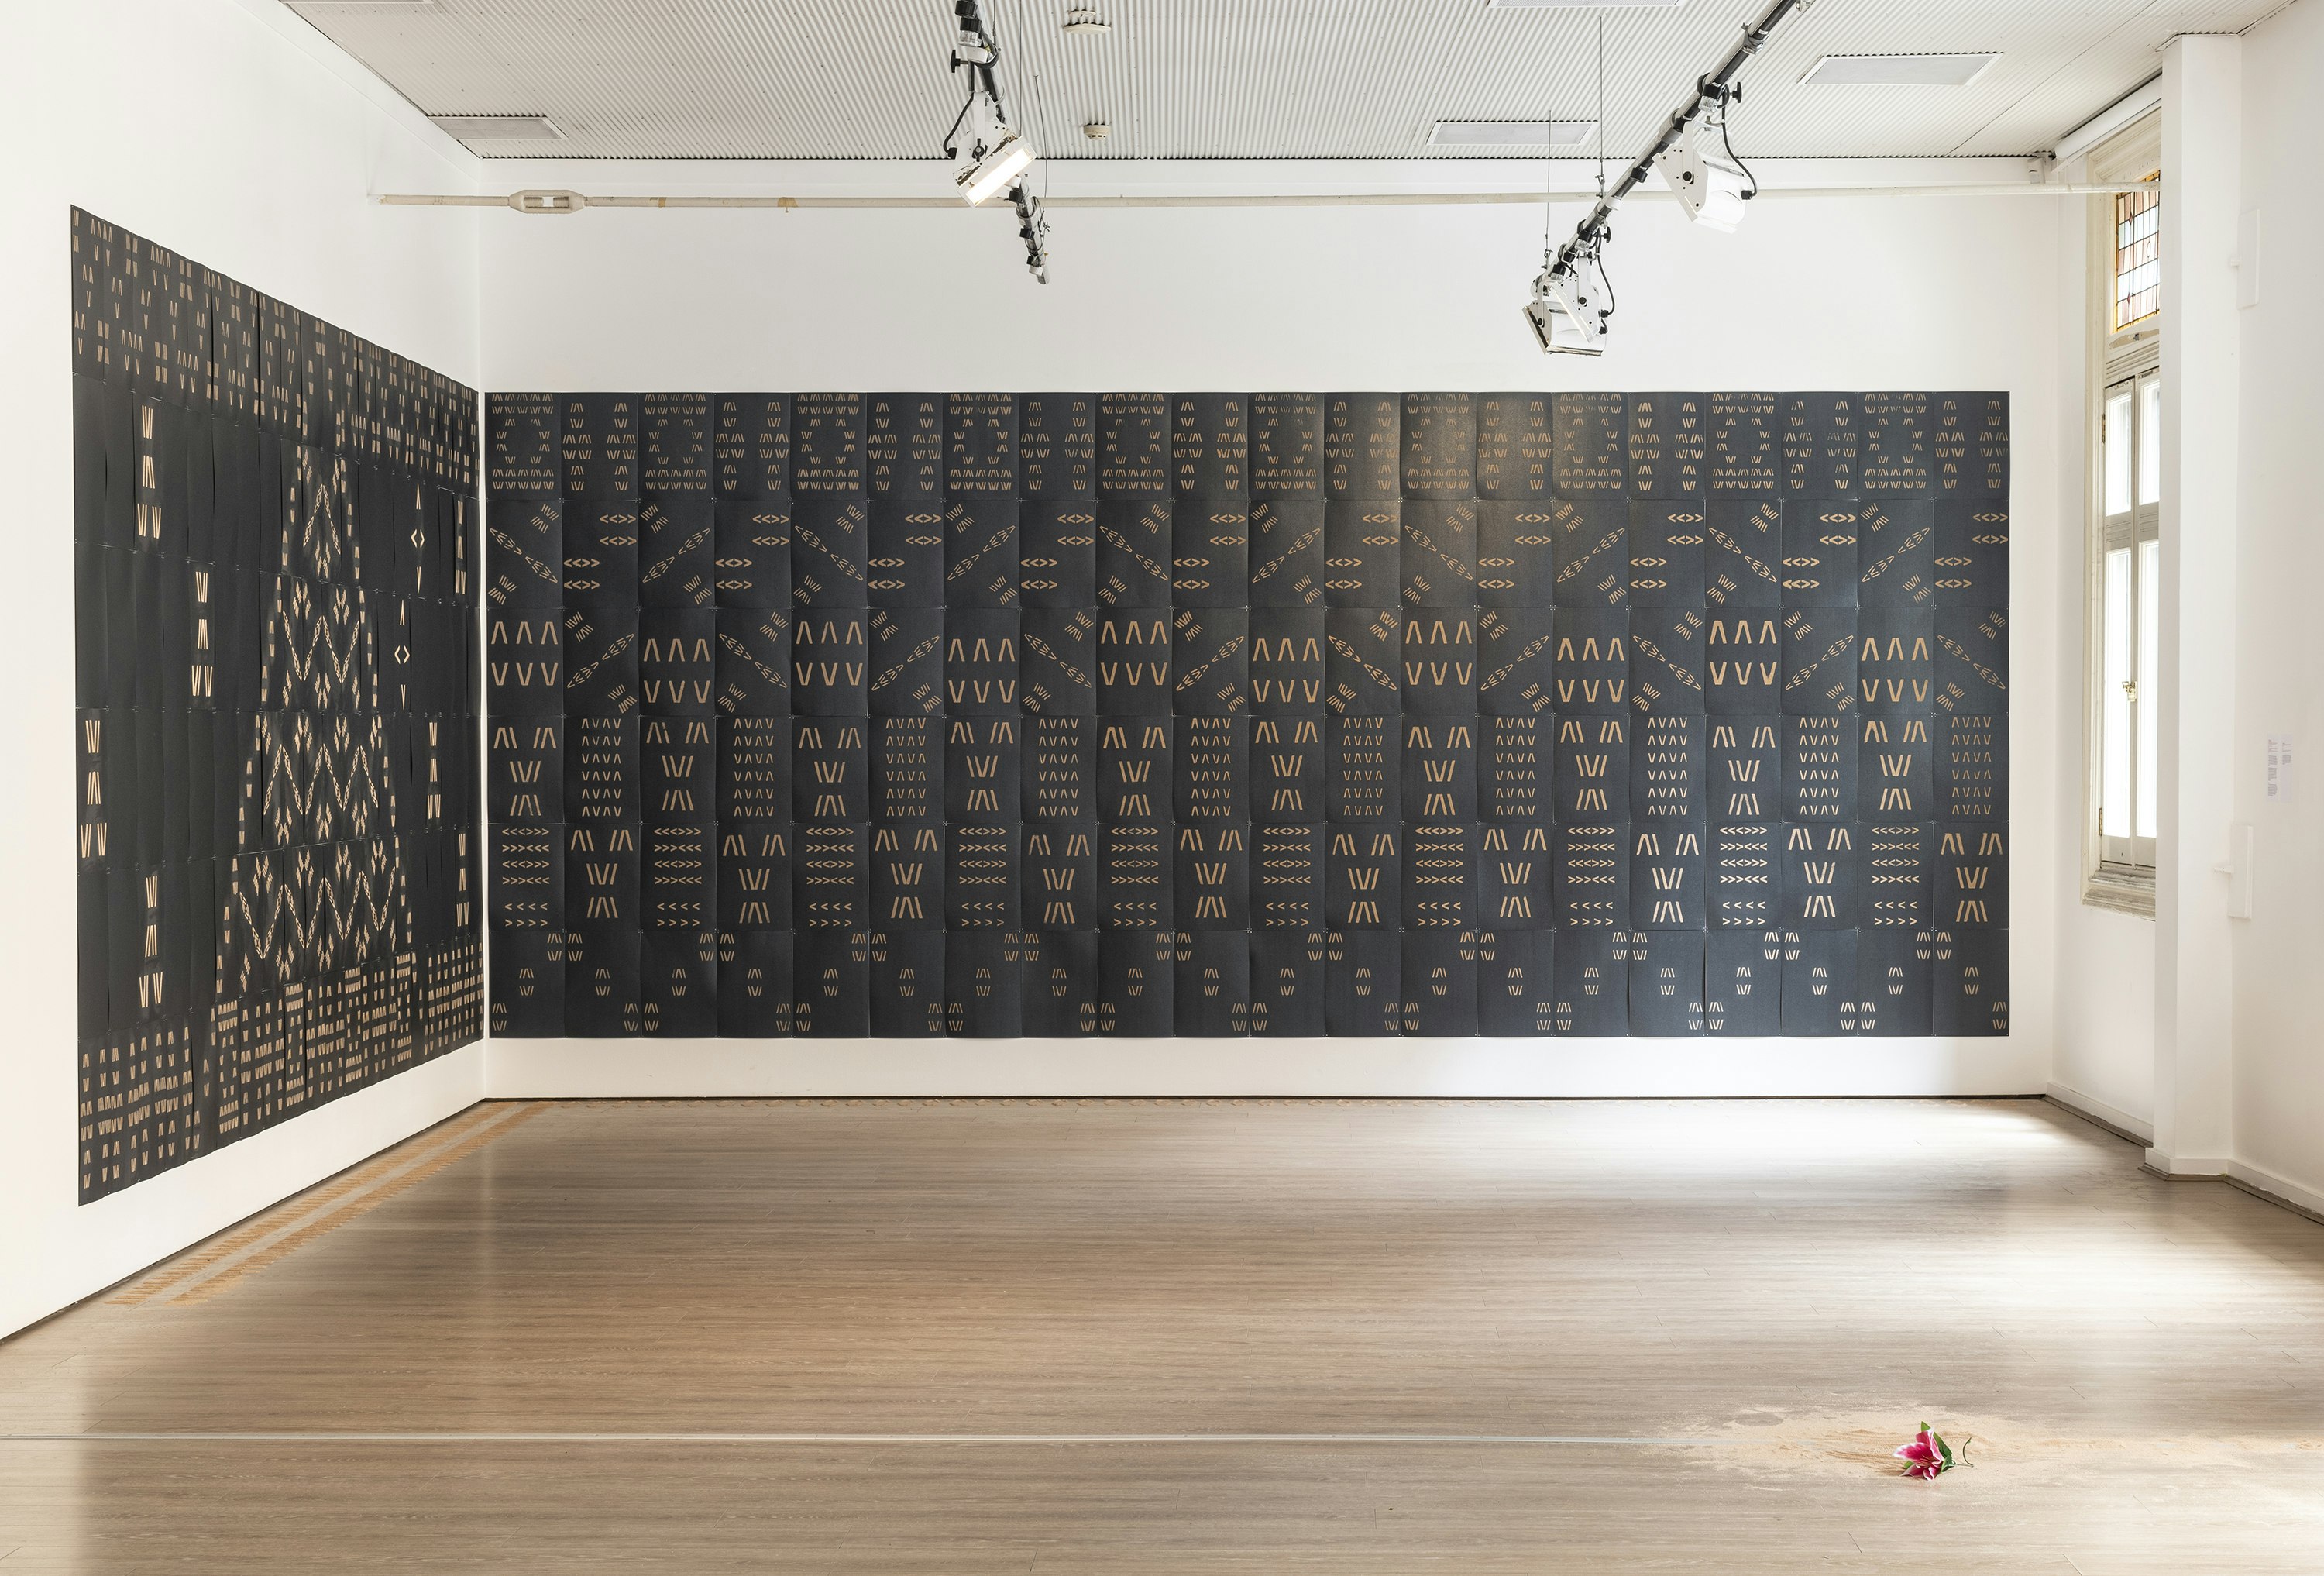 Vaimaila Urale, Manamea ma Anivanuanua, 2020, installation view: black card and sand, 240 pieces across two walls, each wall installation measuring 5940x2520mm; commissioned by 4A Centre for Contemporary Asian Art for Wansolwara: One Salt Water; photo: Kai Wasikowski for 4A Centre for Contemporary Asian Art; courtesy the artist.